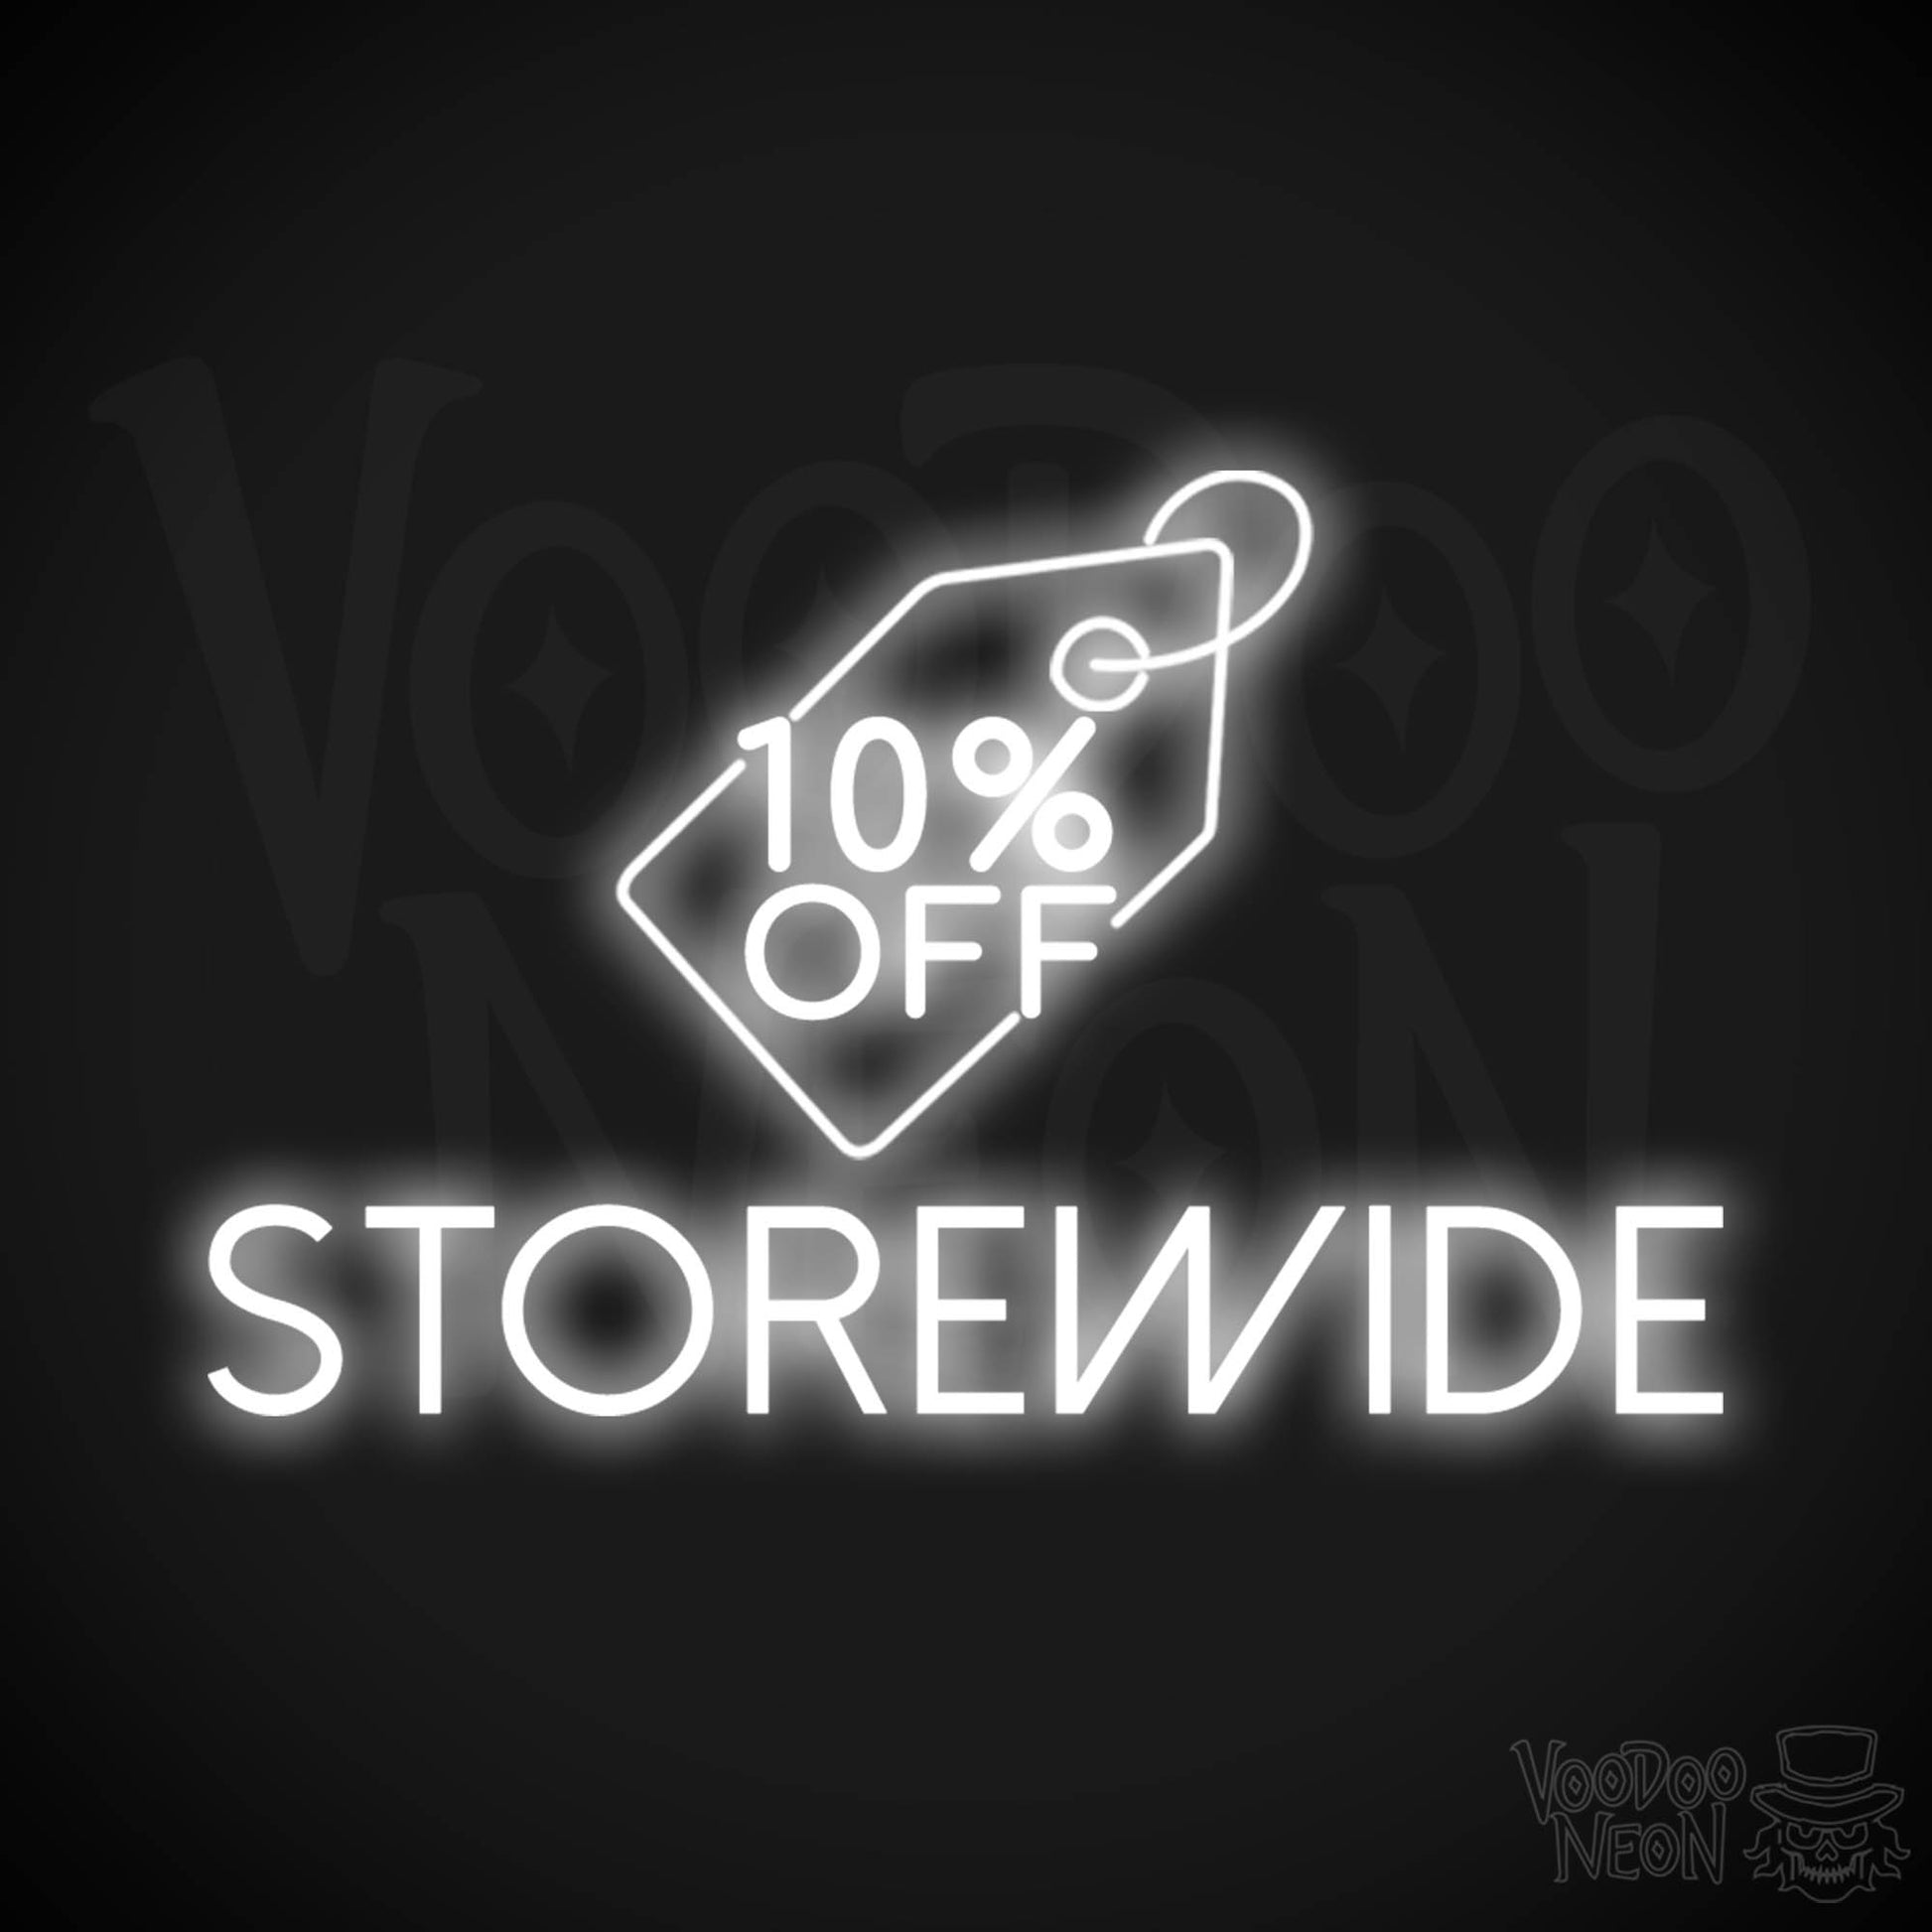 10% Off Storewide Neon Sign - 10% Off Storewide Sign - Neon Shop Signs - Color White